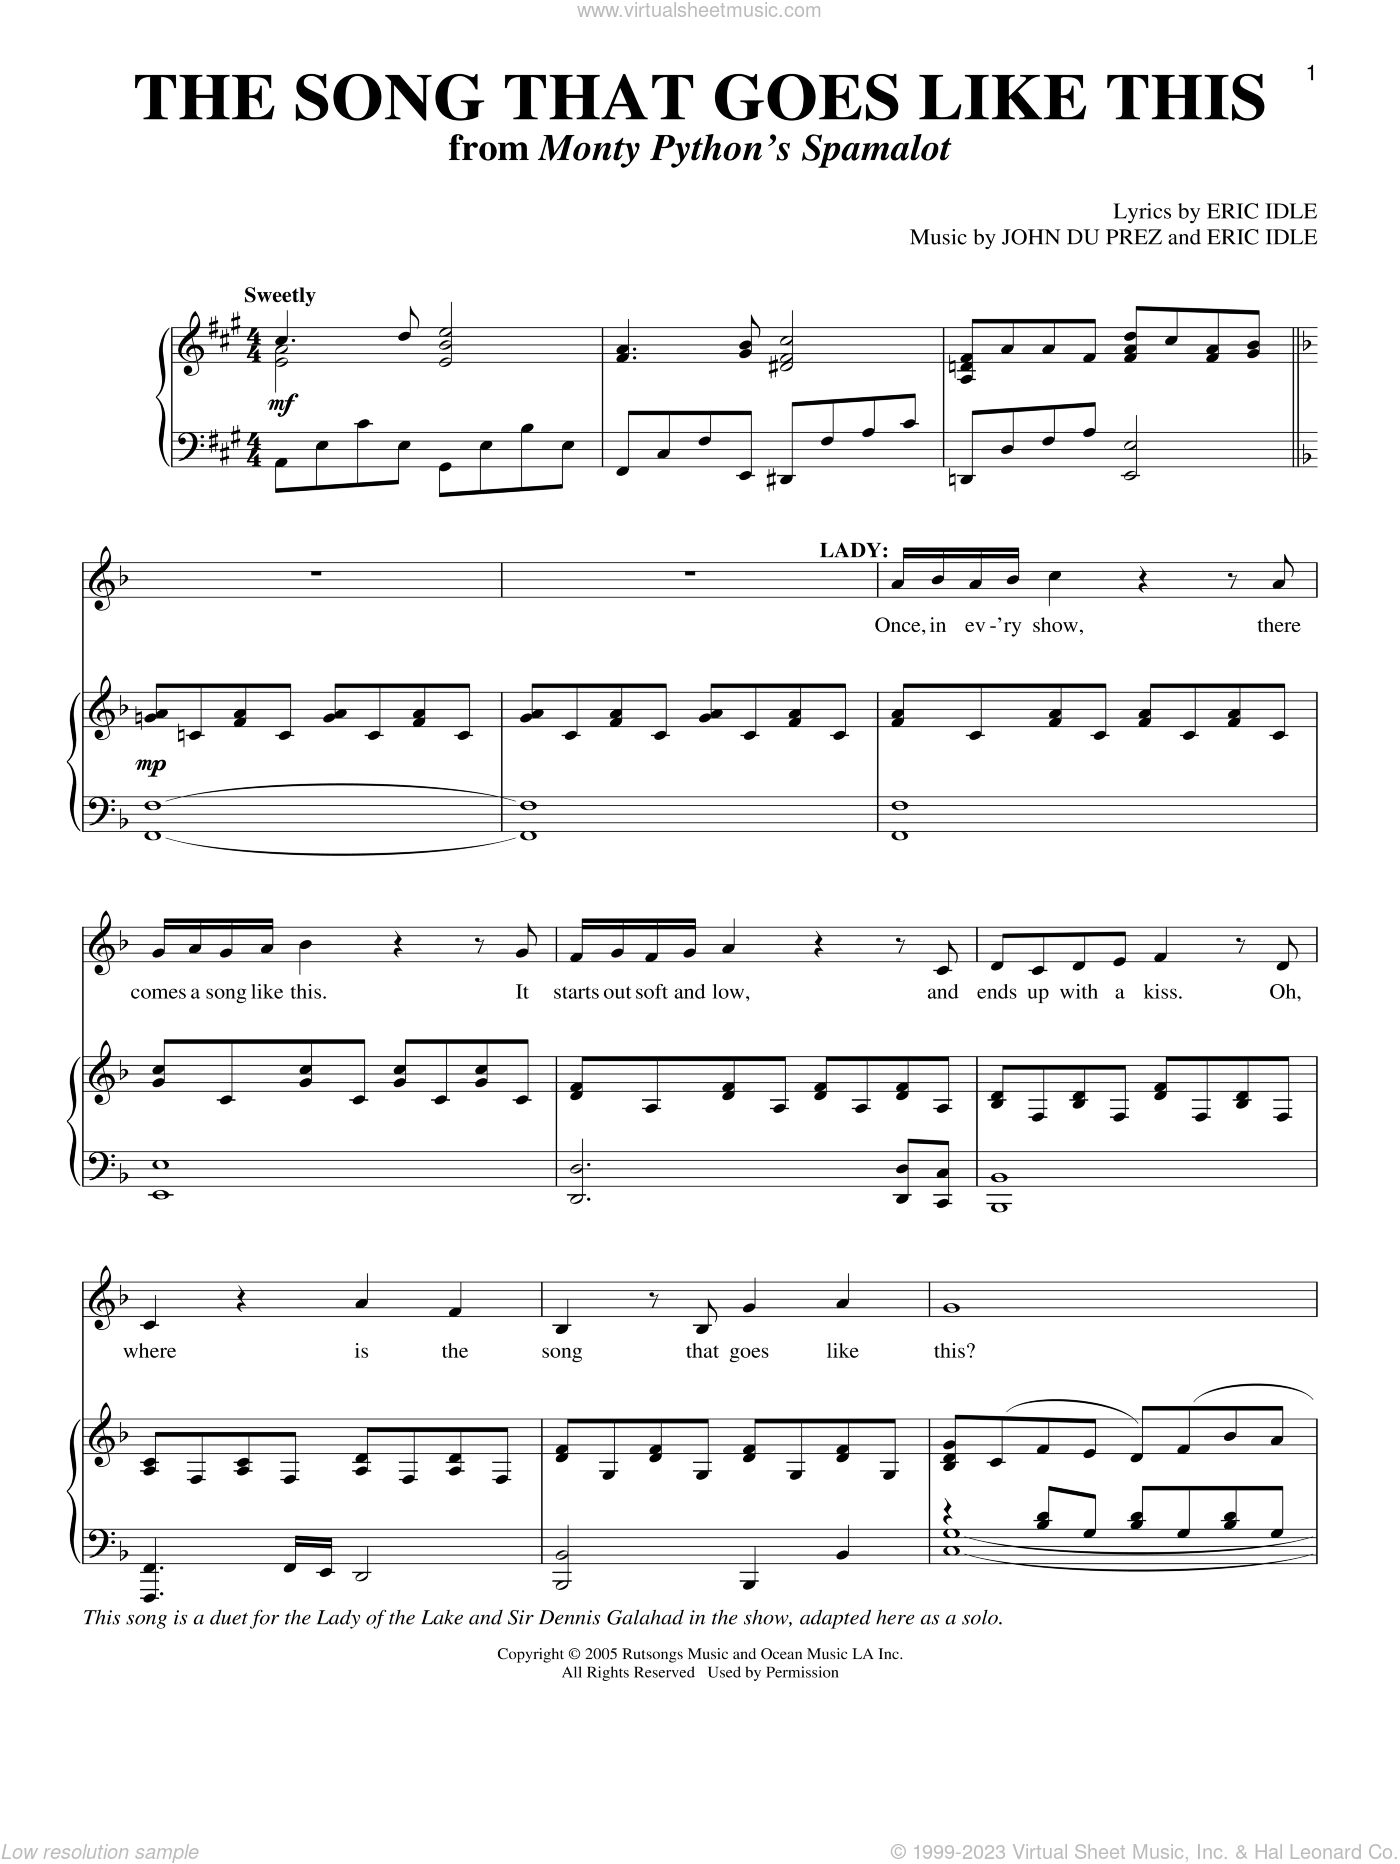 Idle - The Song That Goes Like This (from Monty Python's Spamalot) sheet  music for voice and piano